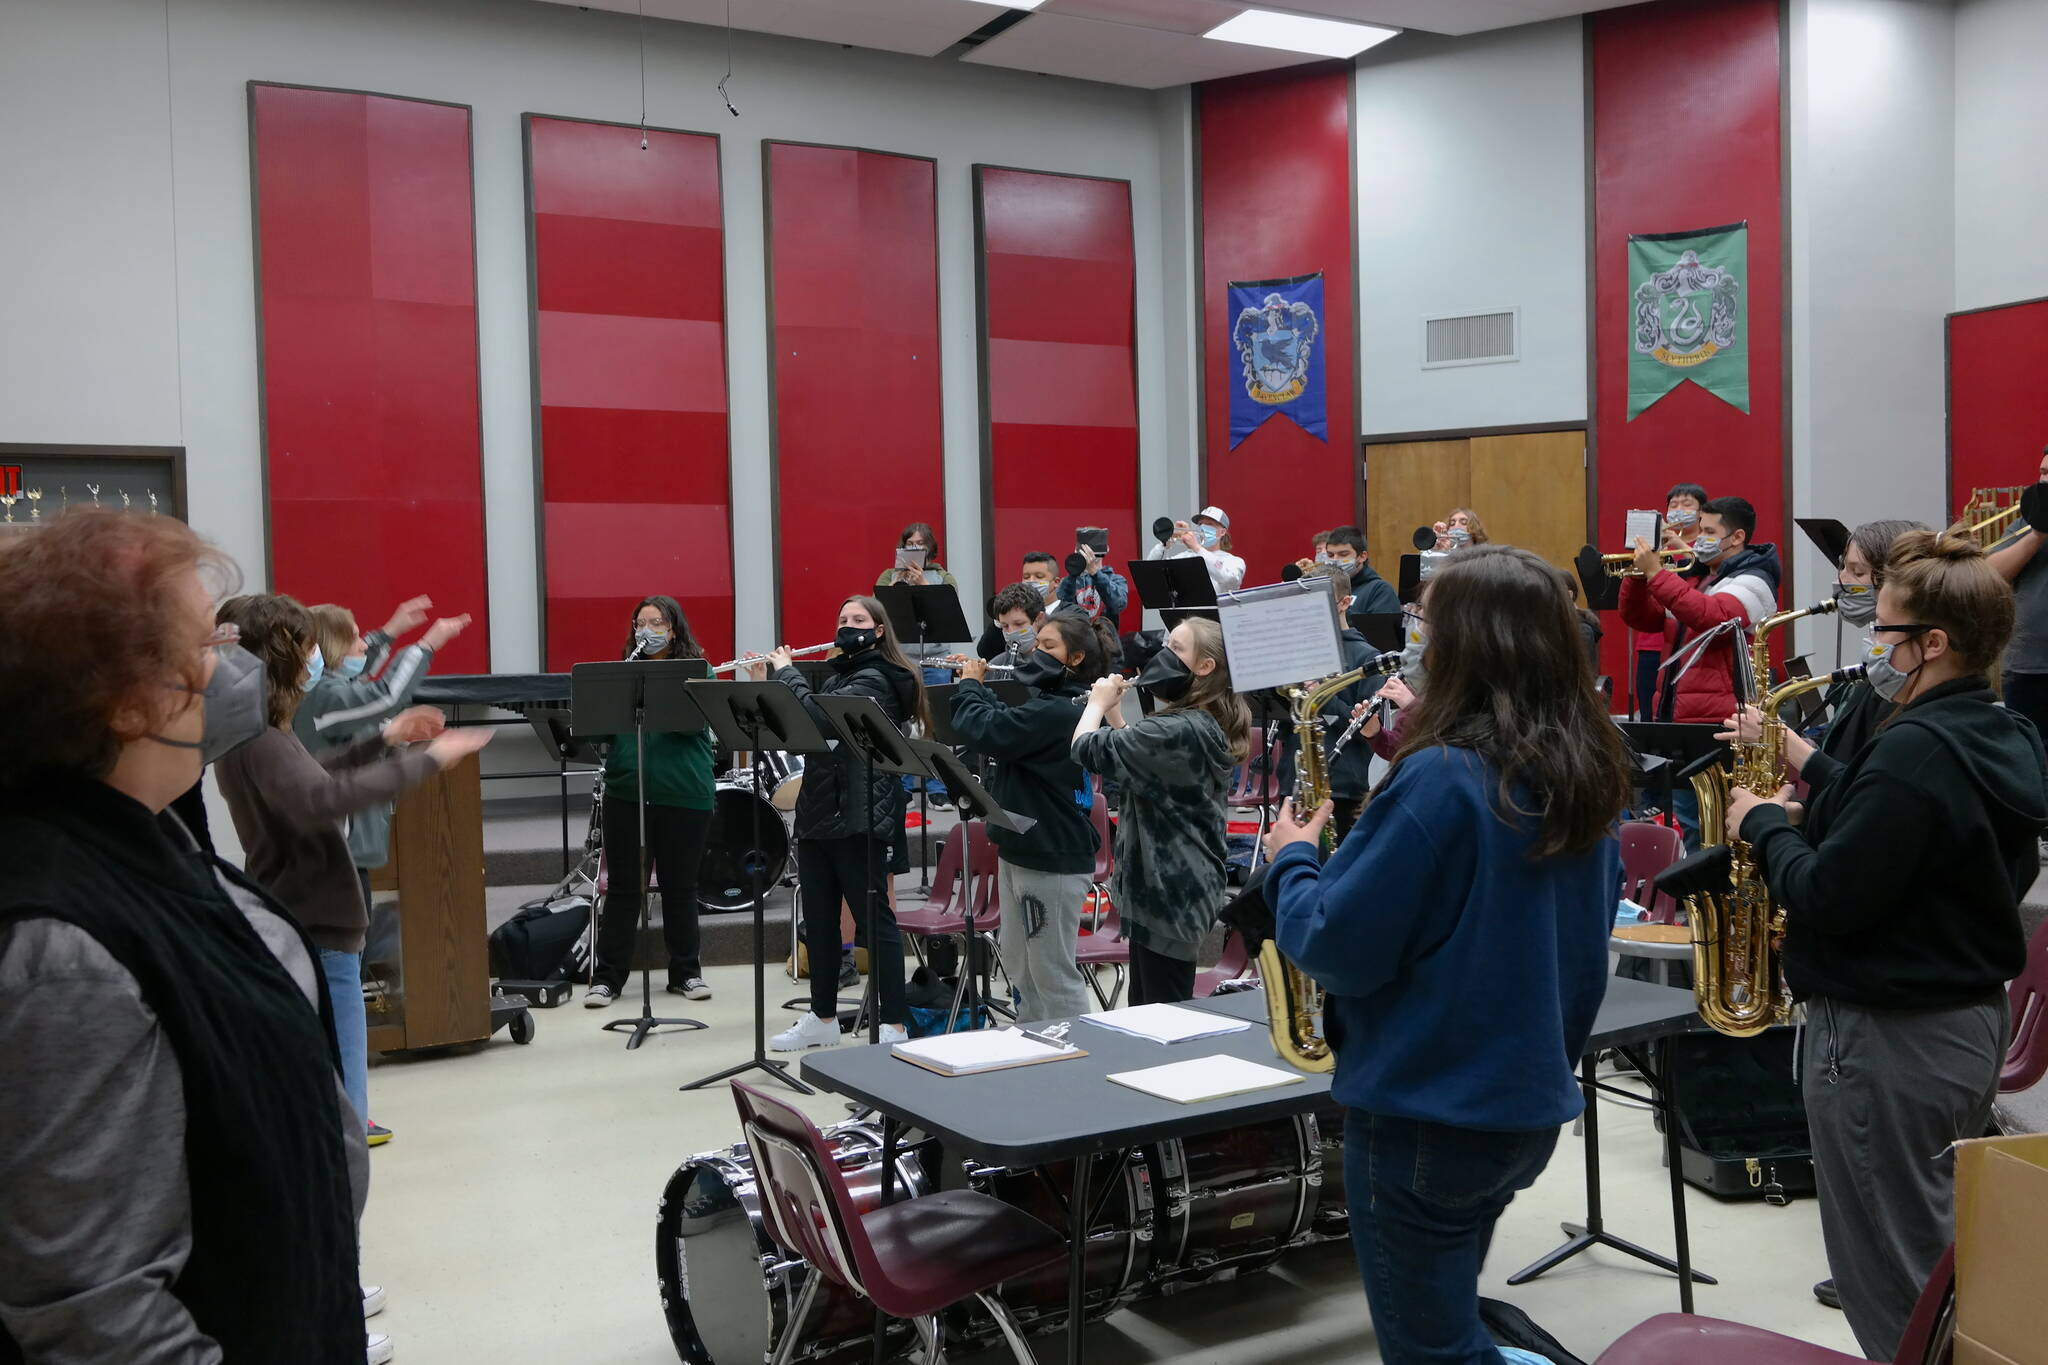 The HHS band performs "Hey Baby (Uhh, Ahh)" by DJ Ötzi on Wednesday, March 30. They have been practicing several pep songs as well as their marching skills in preparation for their upcoming performances. Erika Gebhardt I The Daily World